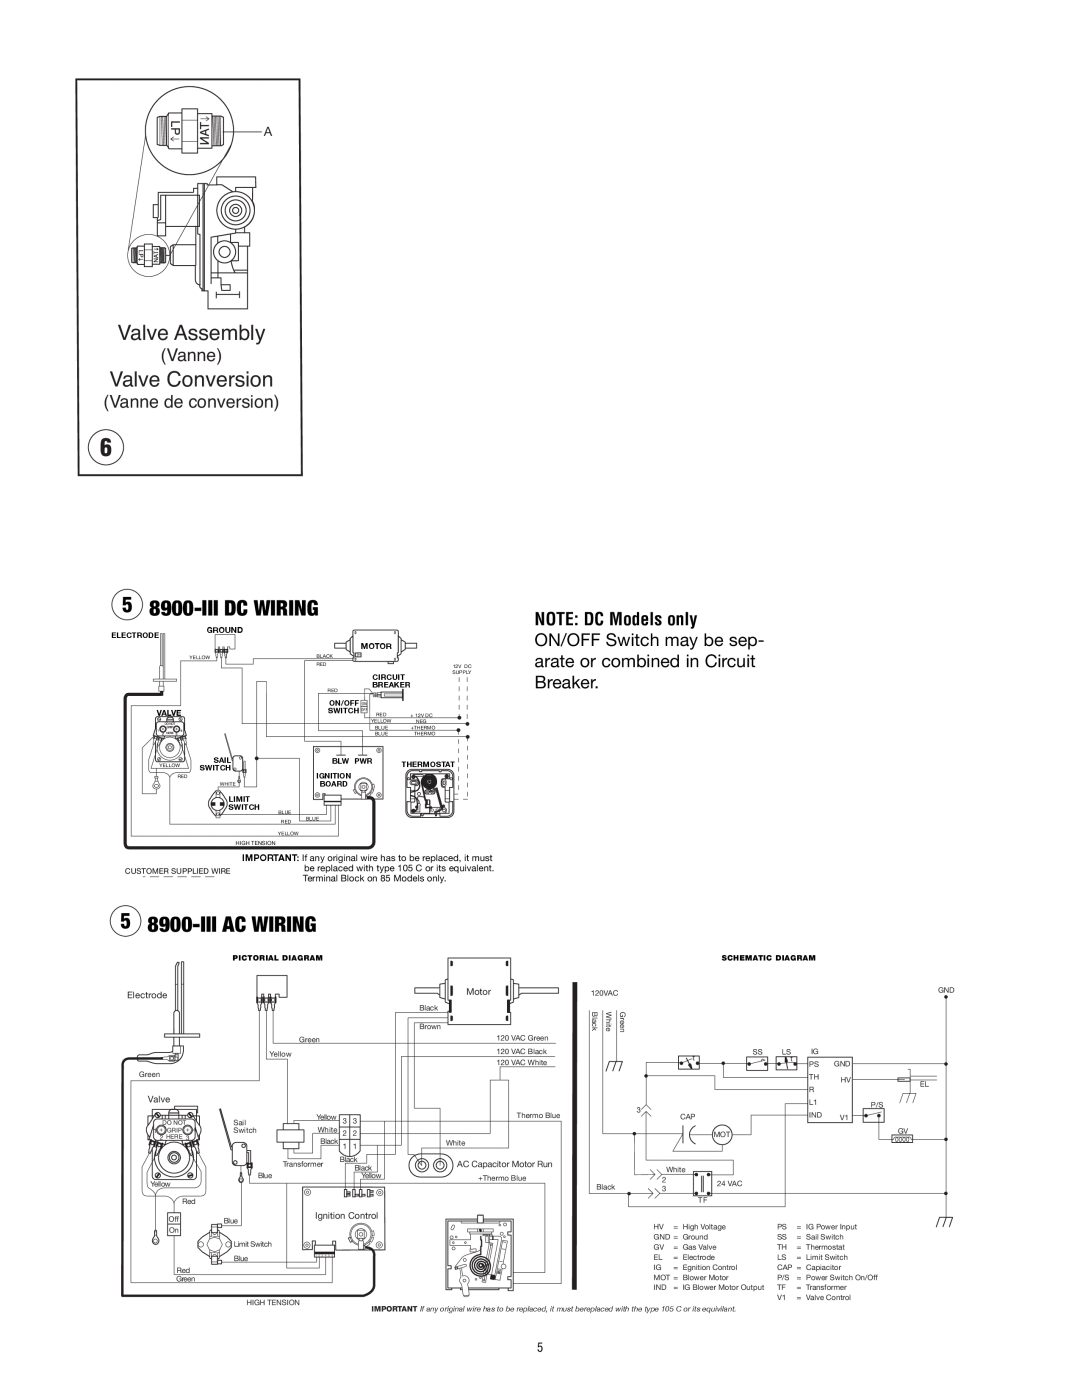 Atwood Mobile Products 8935 Valve Assembly, Valve Conversion, Iiidc Wiring, Iiiac Wiring, Vanne de conversion, Motor 